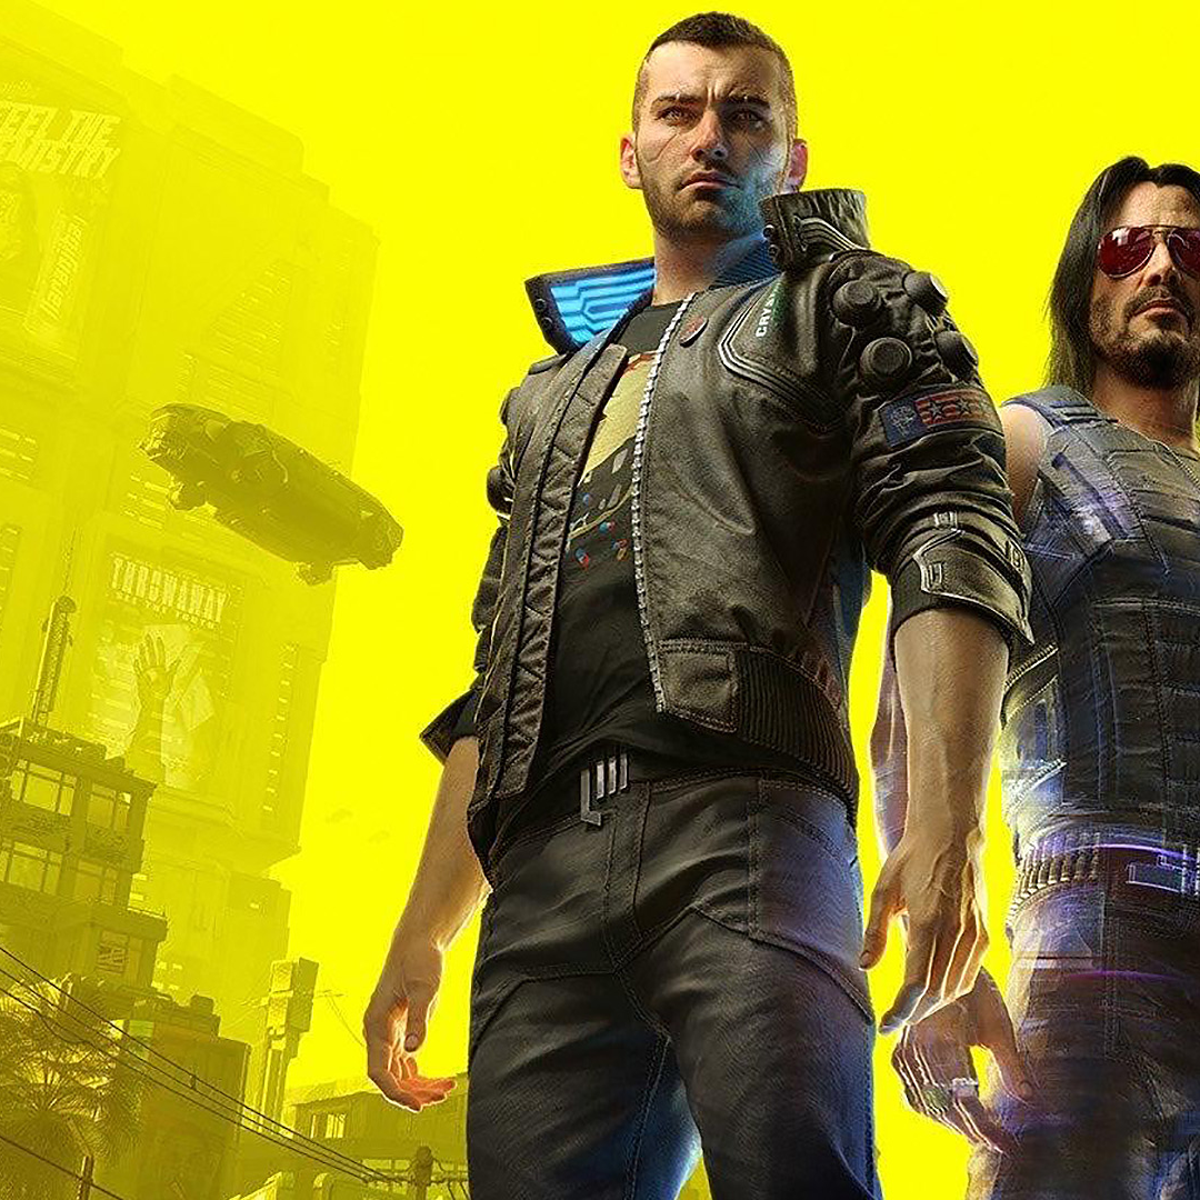 Cyberpunk 2077 2.0 made the game click for me, but that doesn't mean 'it  was always good